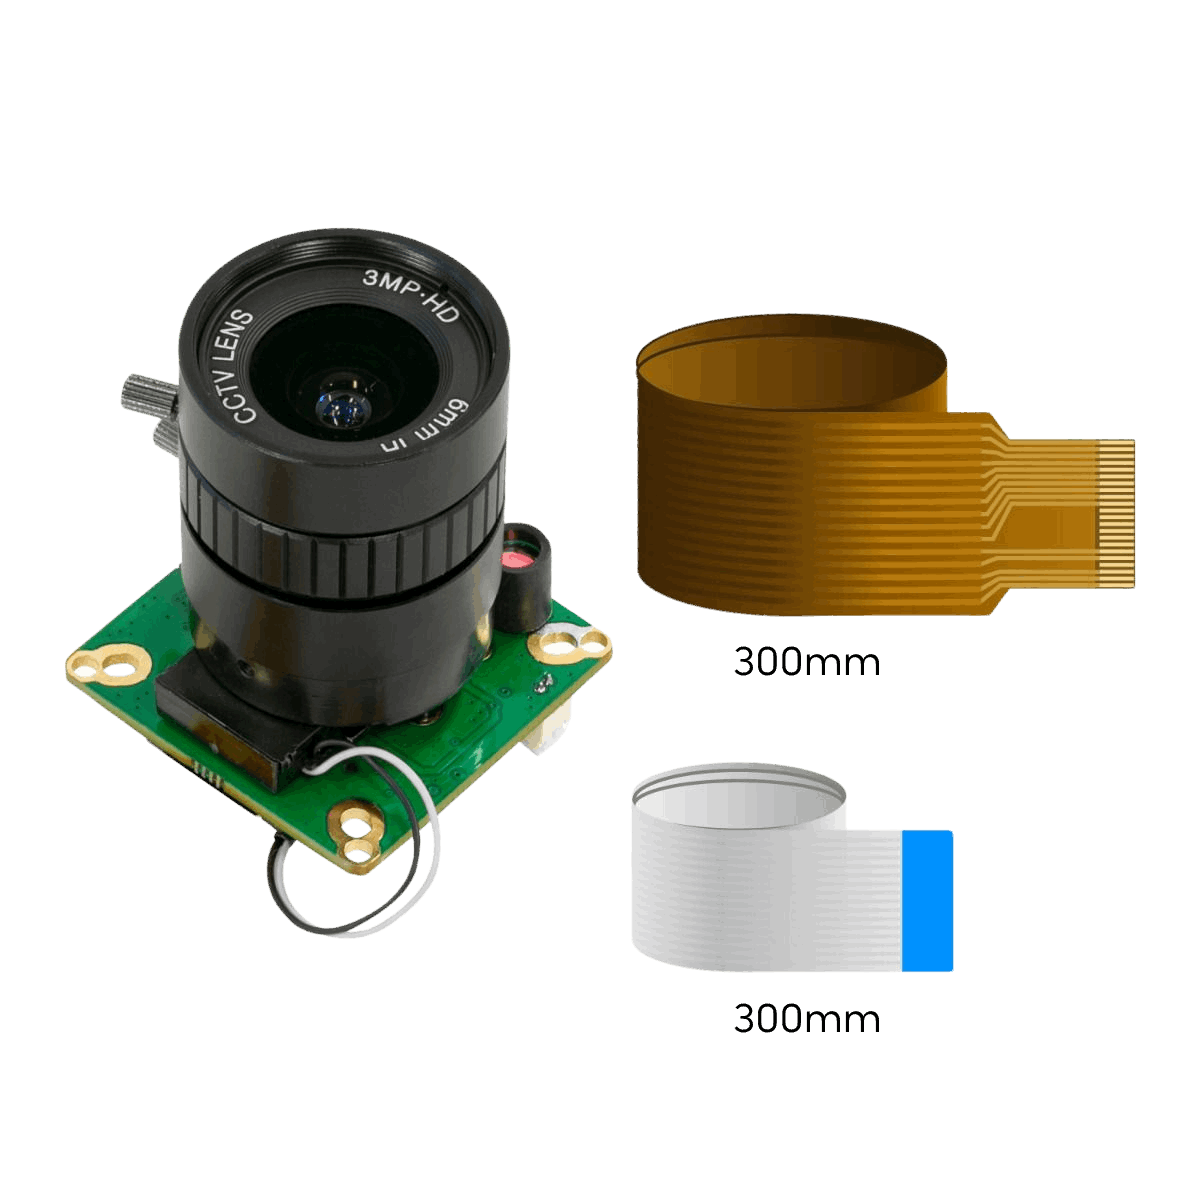 B0240 camera module with two MIPI cables for interfacing